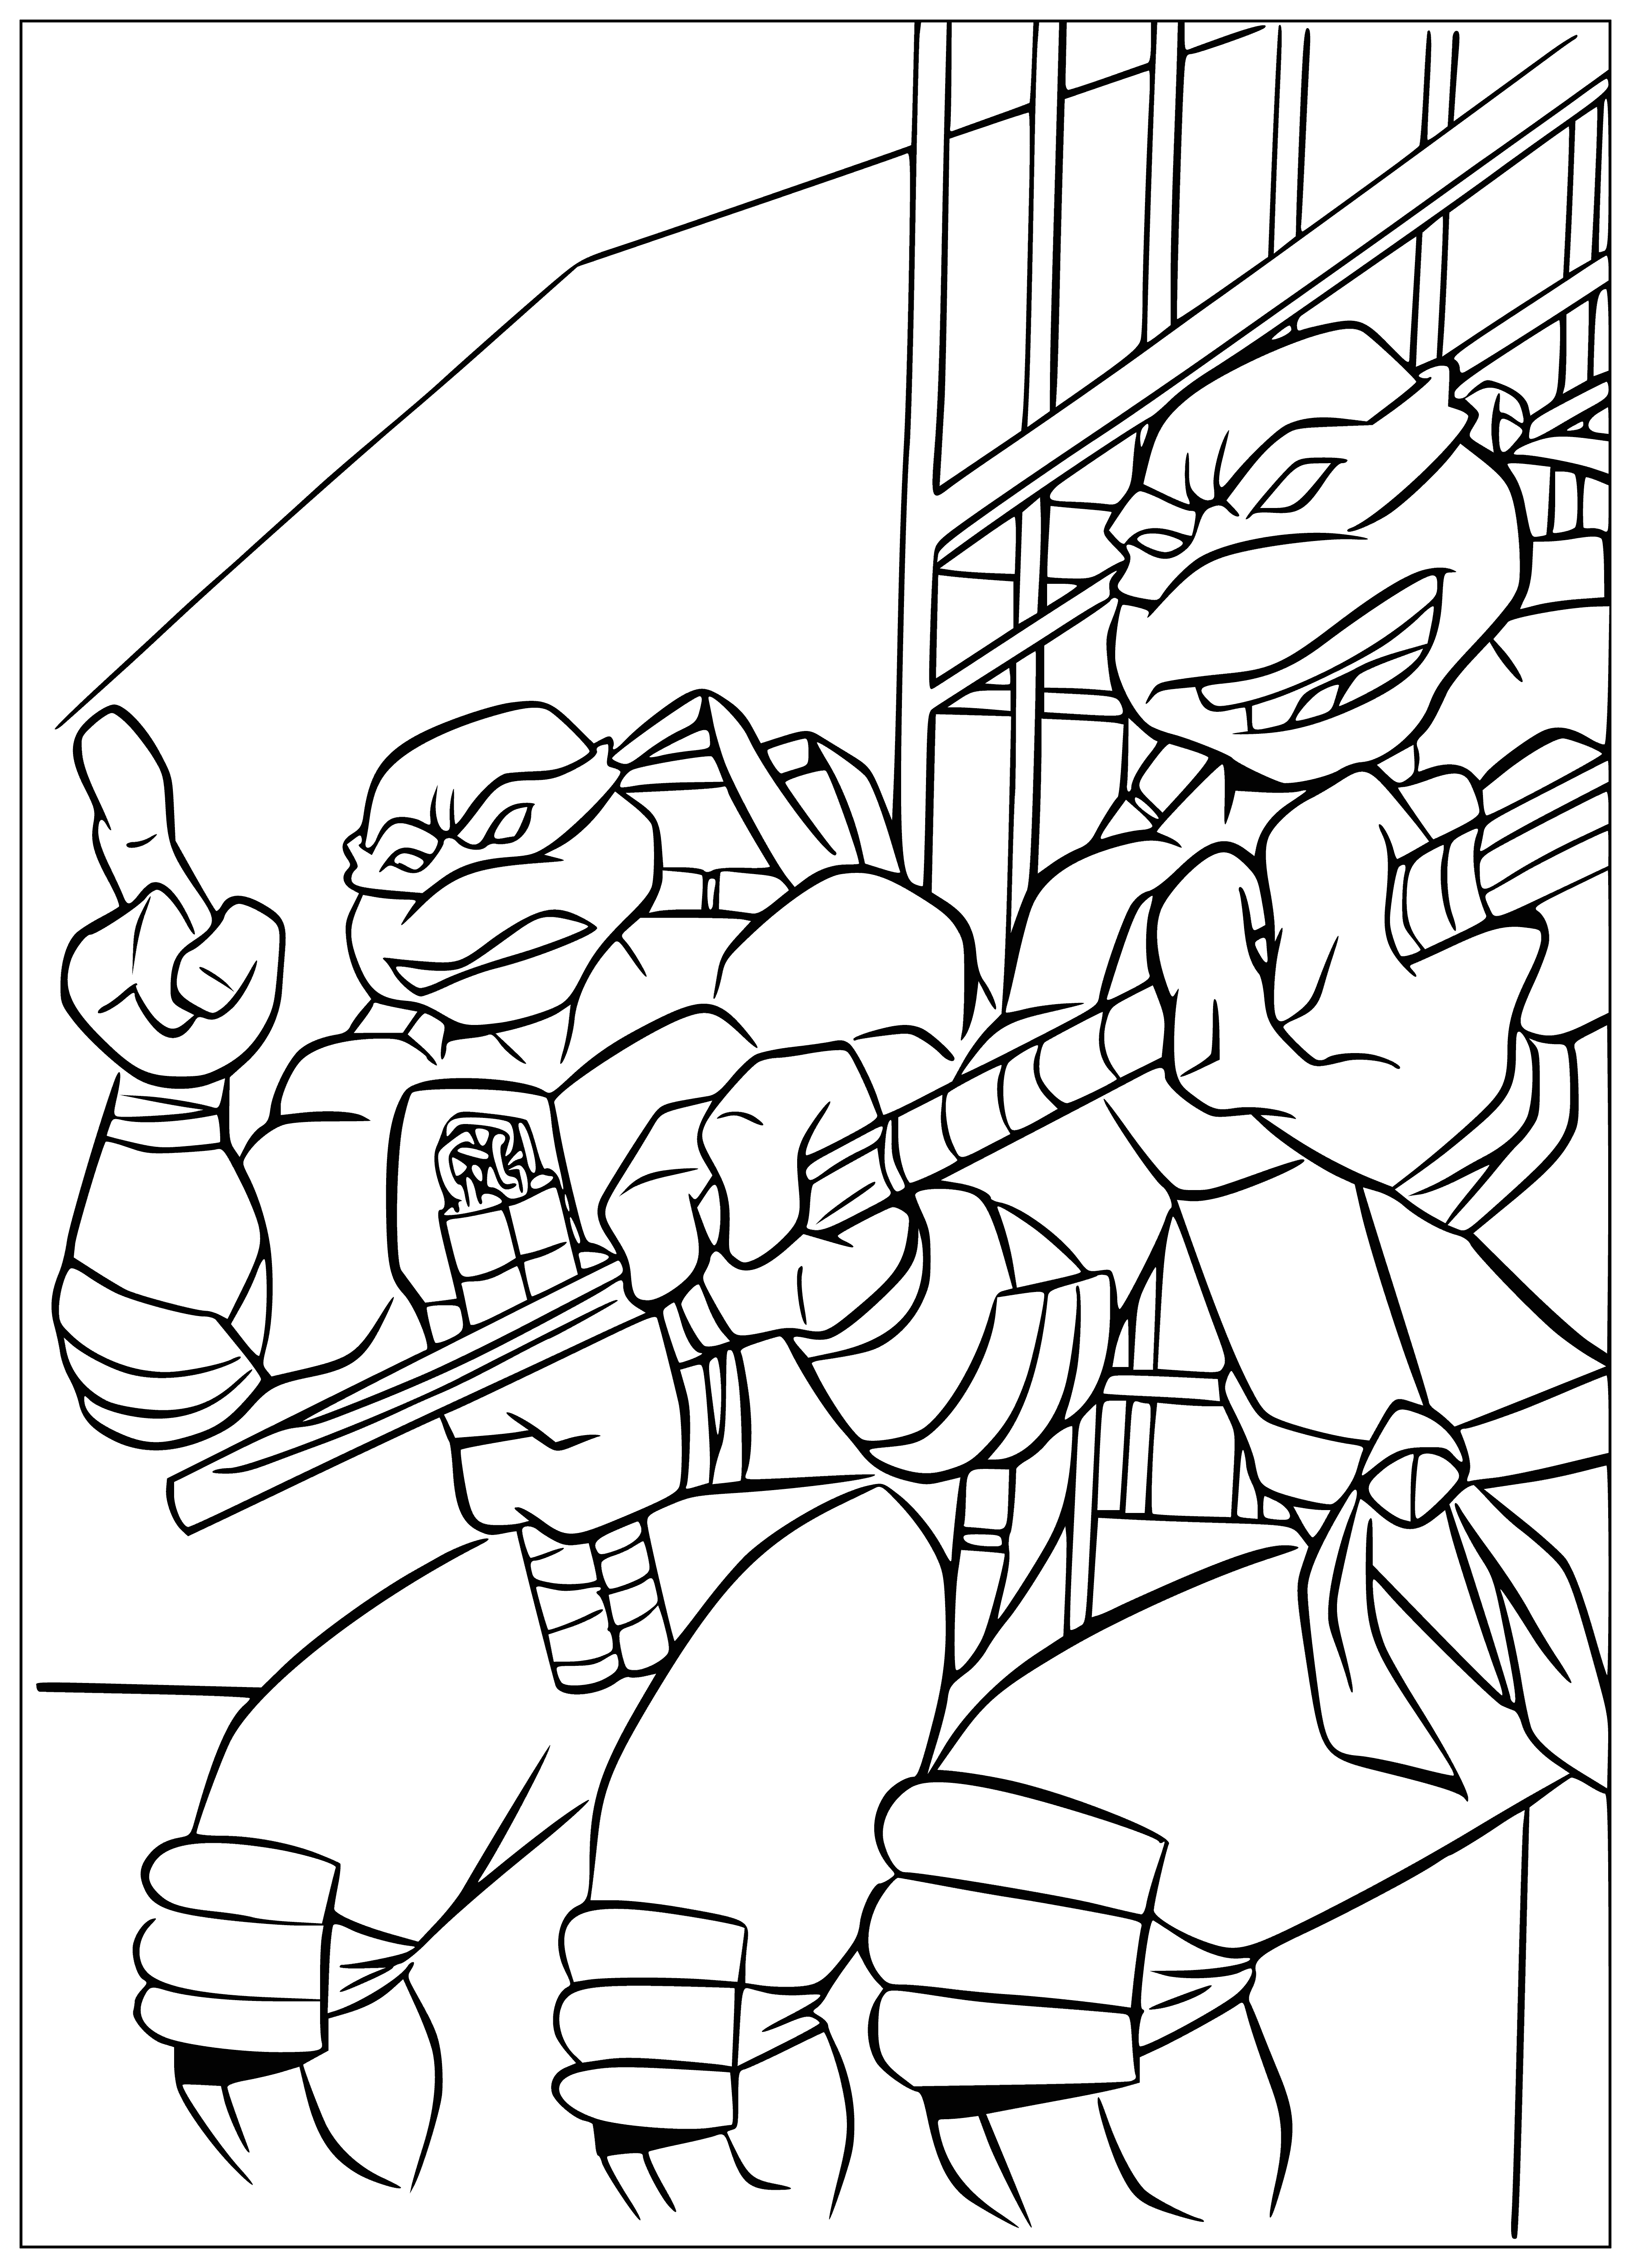 coloring page: The Ninja Turtles are martial arts experts and show emotion - Michelangelo with a smile and Danatello with seriousness.